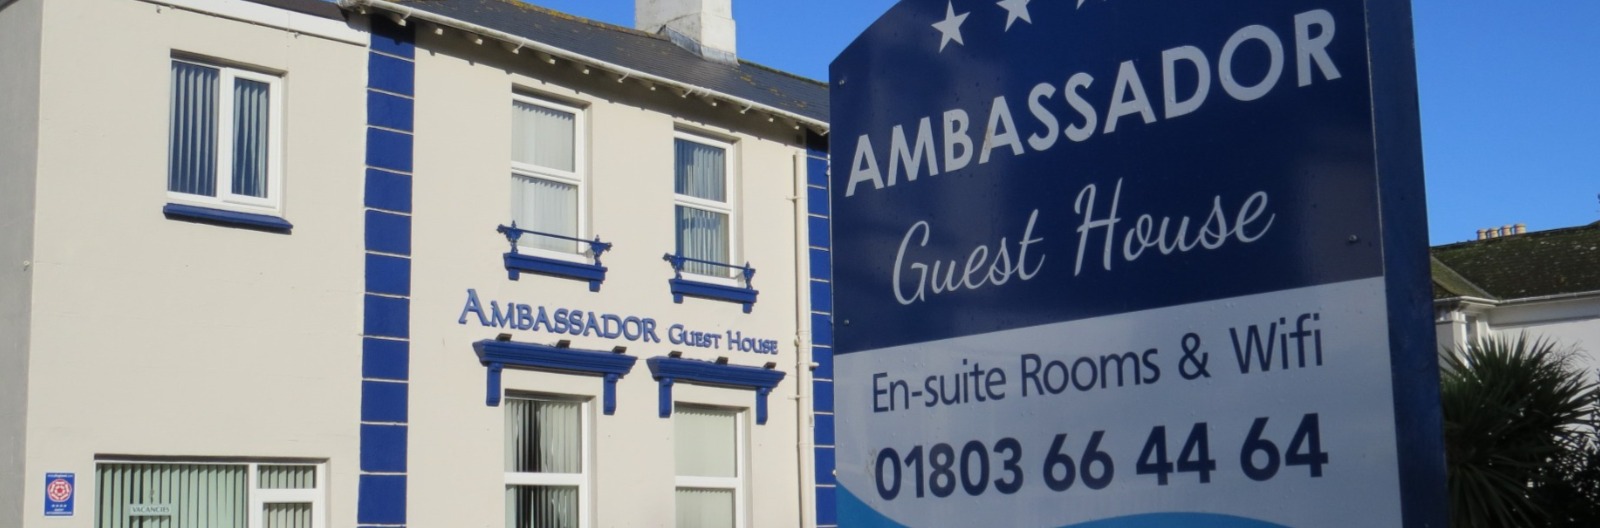 Ambassador Guest house get in touch